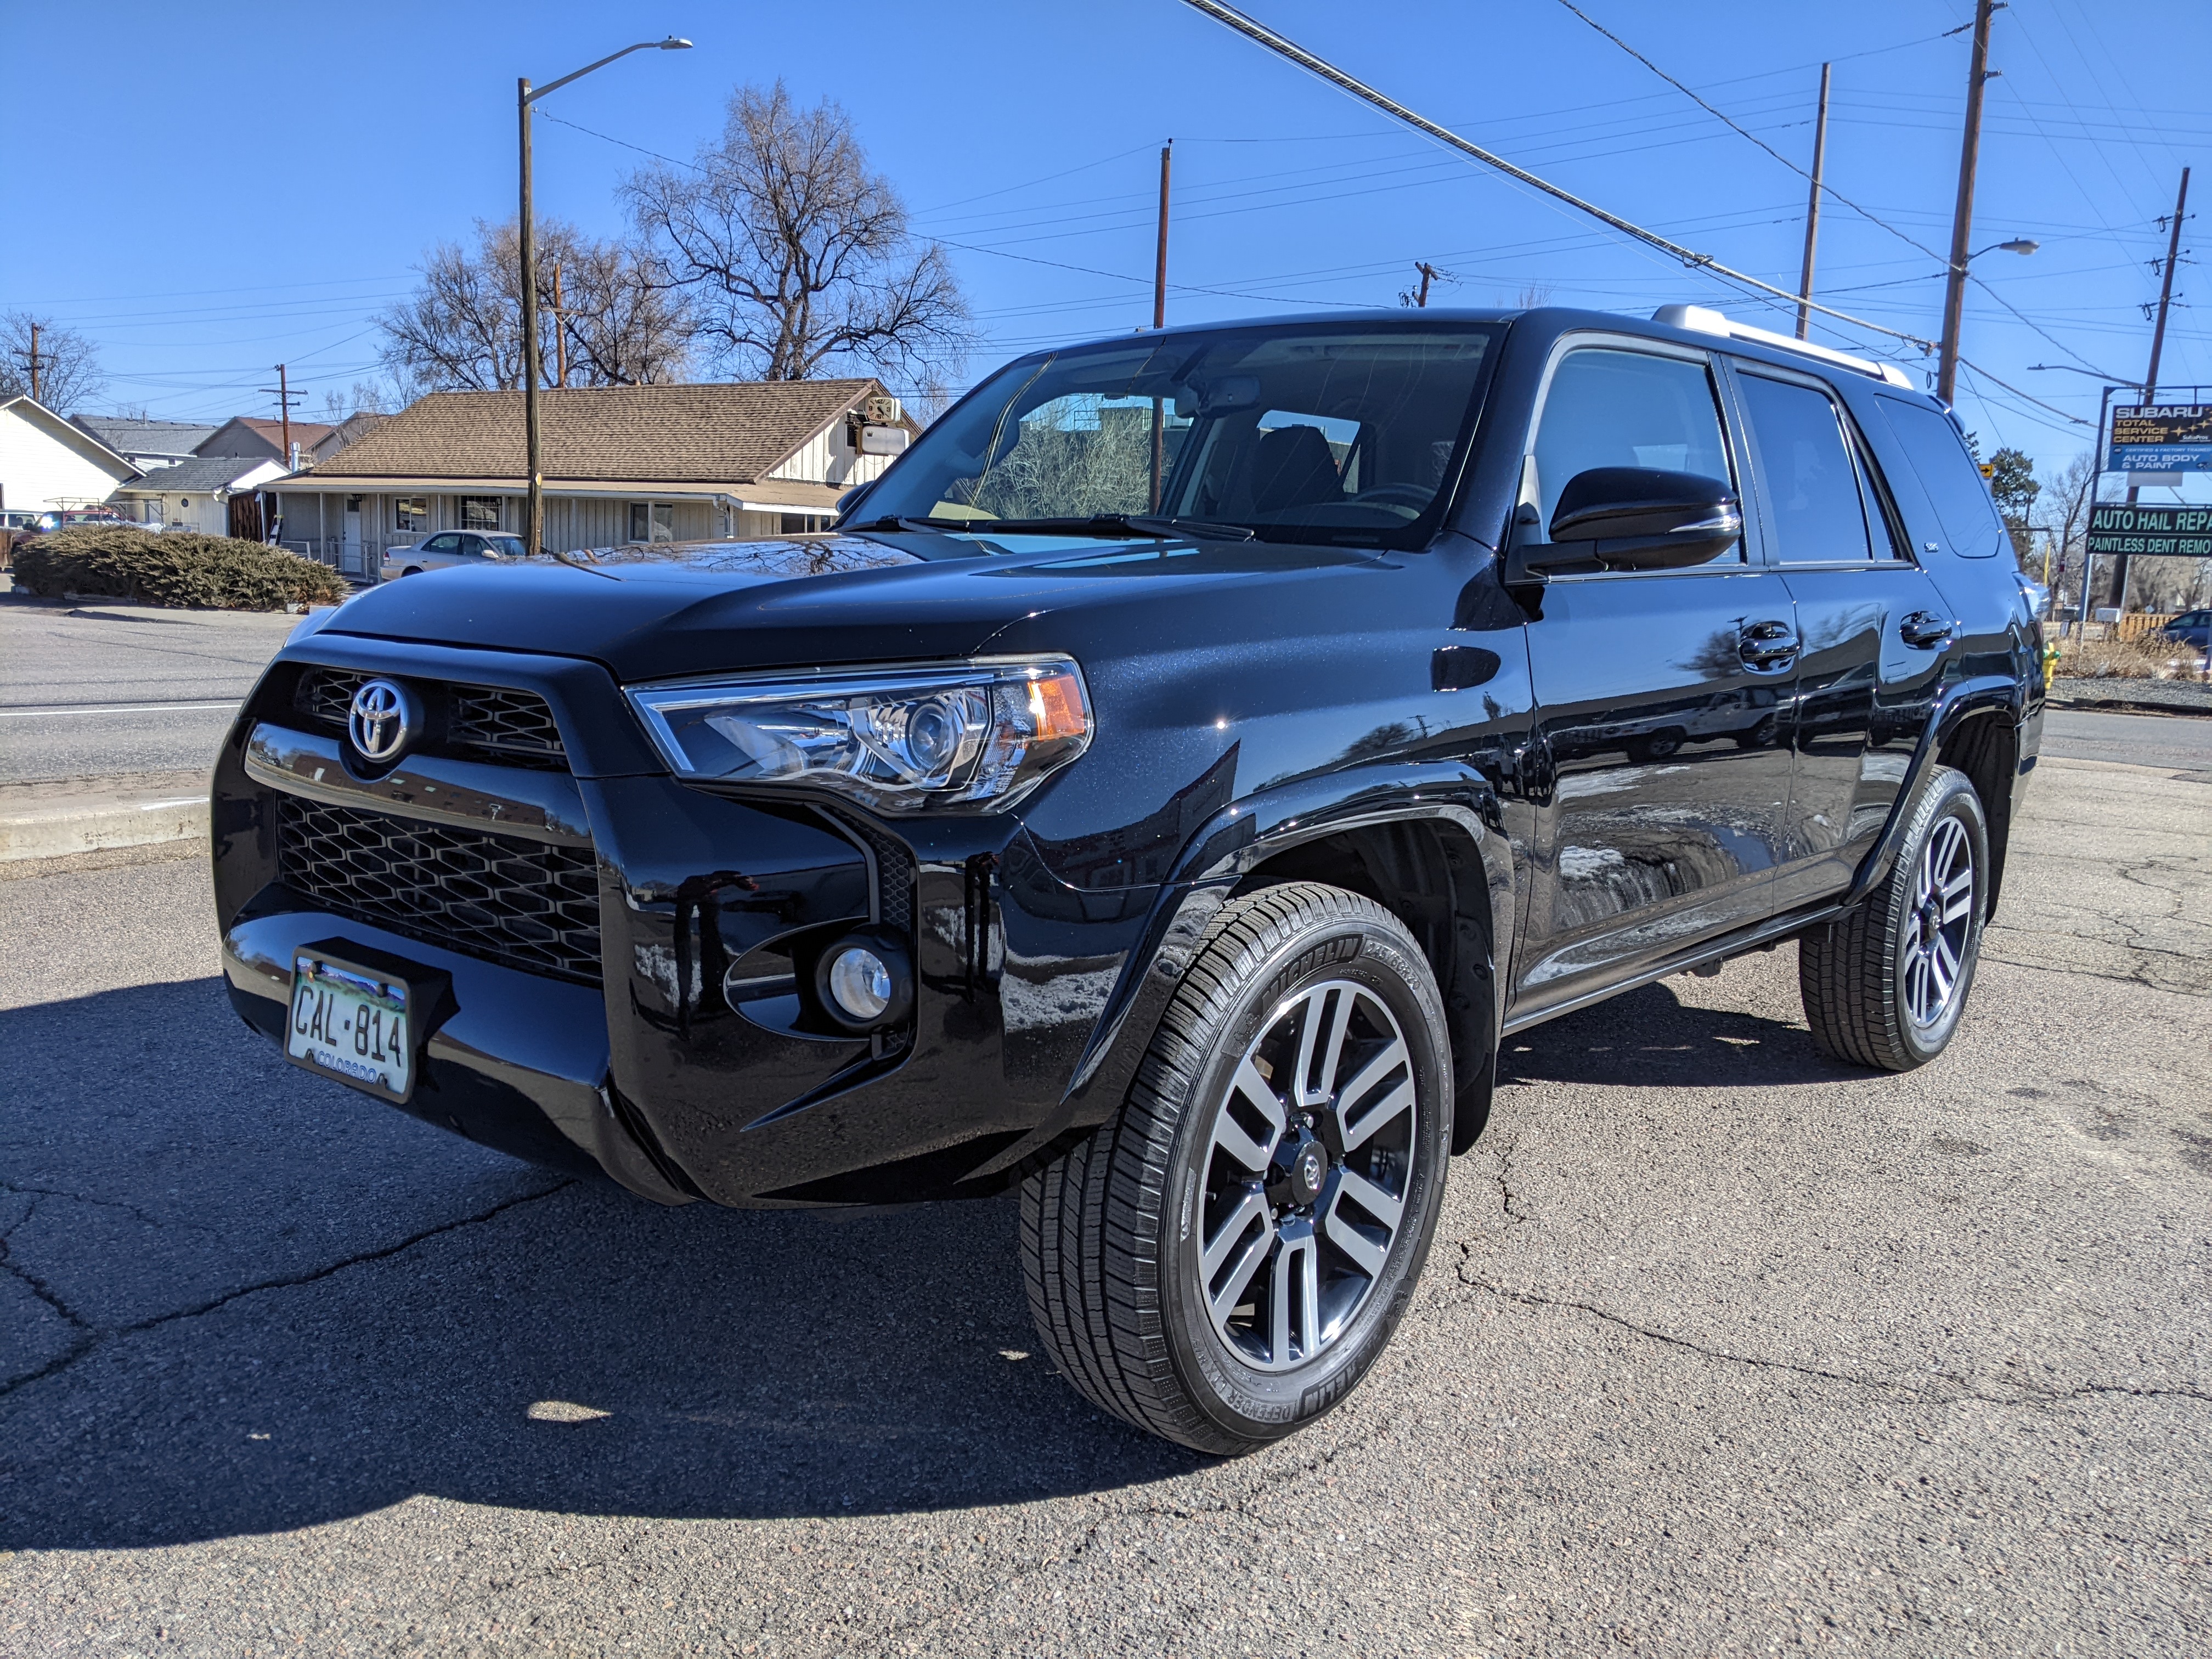 Ceramic coated 2018 Toyota 4Runner SR5 front clip with Ceramic Pro Silver Package.